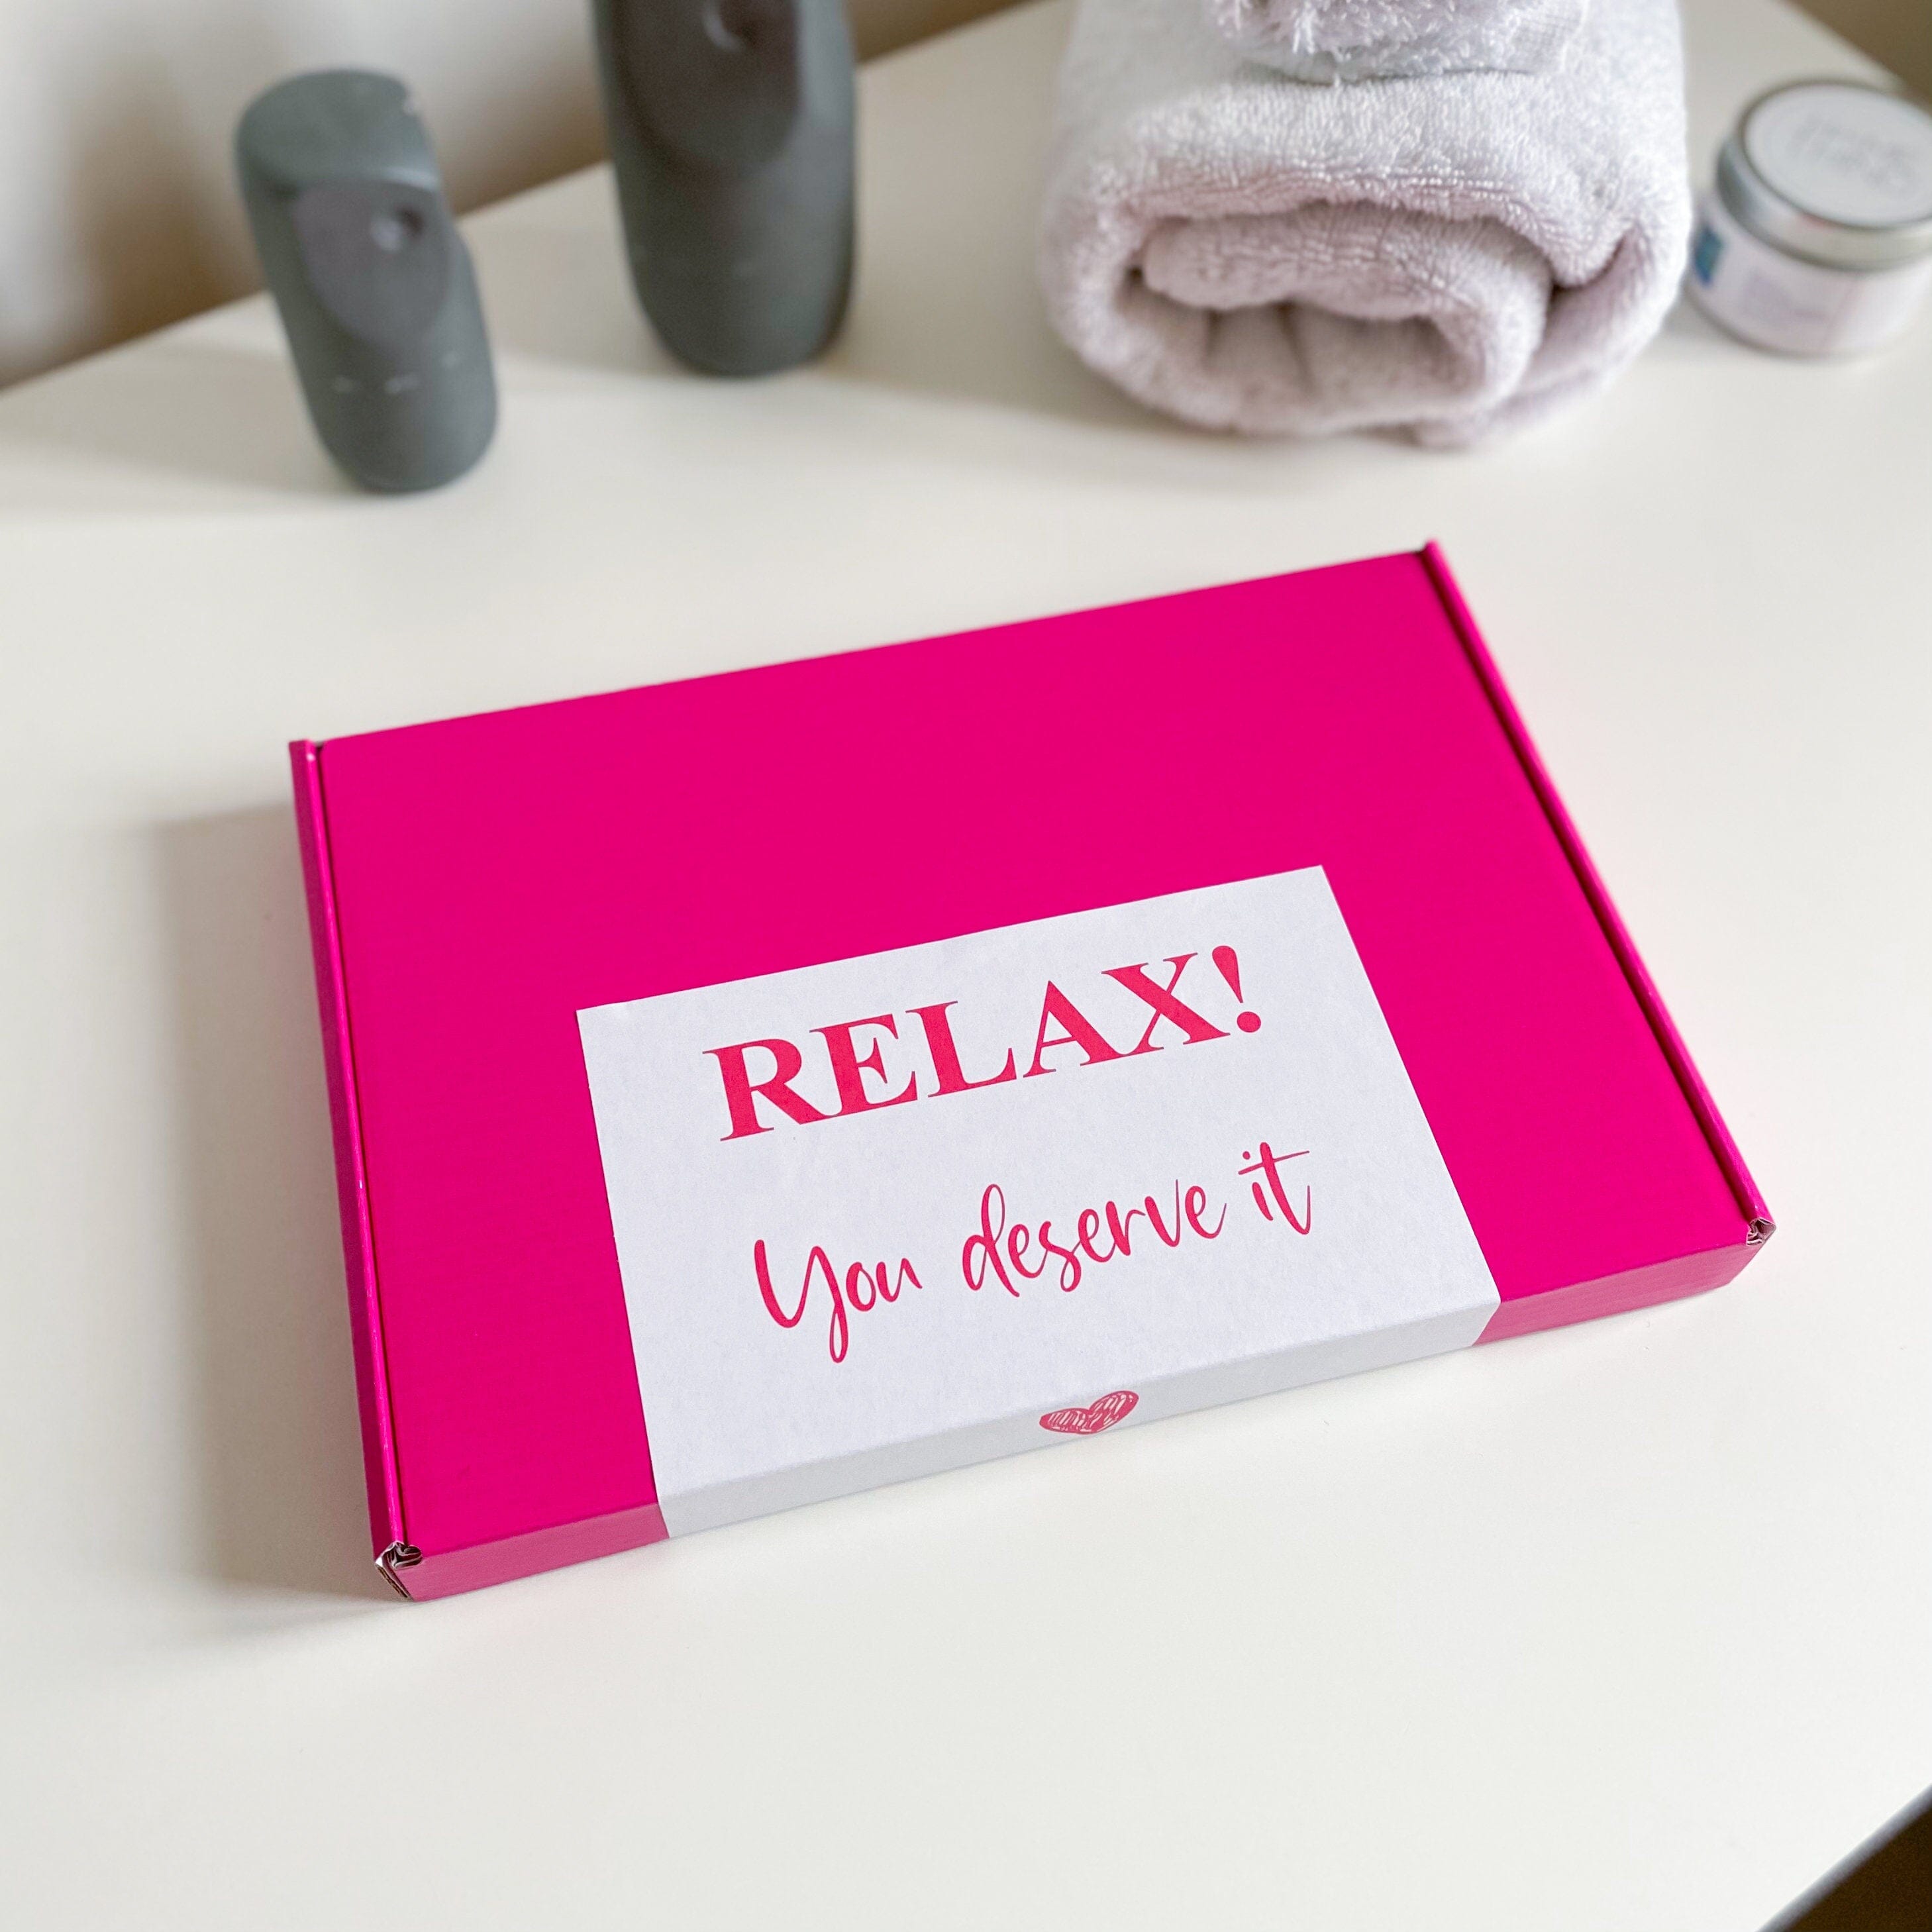 Personalised Birthday Pamper Spa Kit, Relaxation Letterbox Gift for Her, Birthday Hamper Hug in a Box Self-Care Package